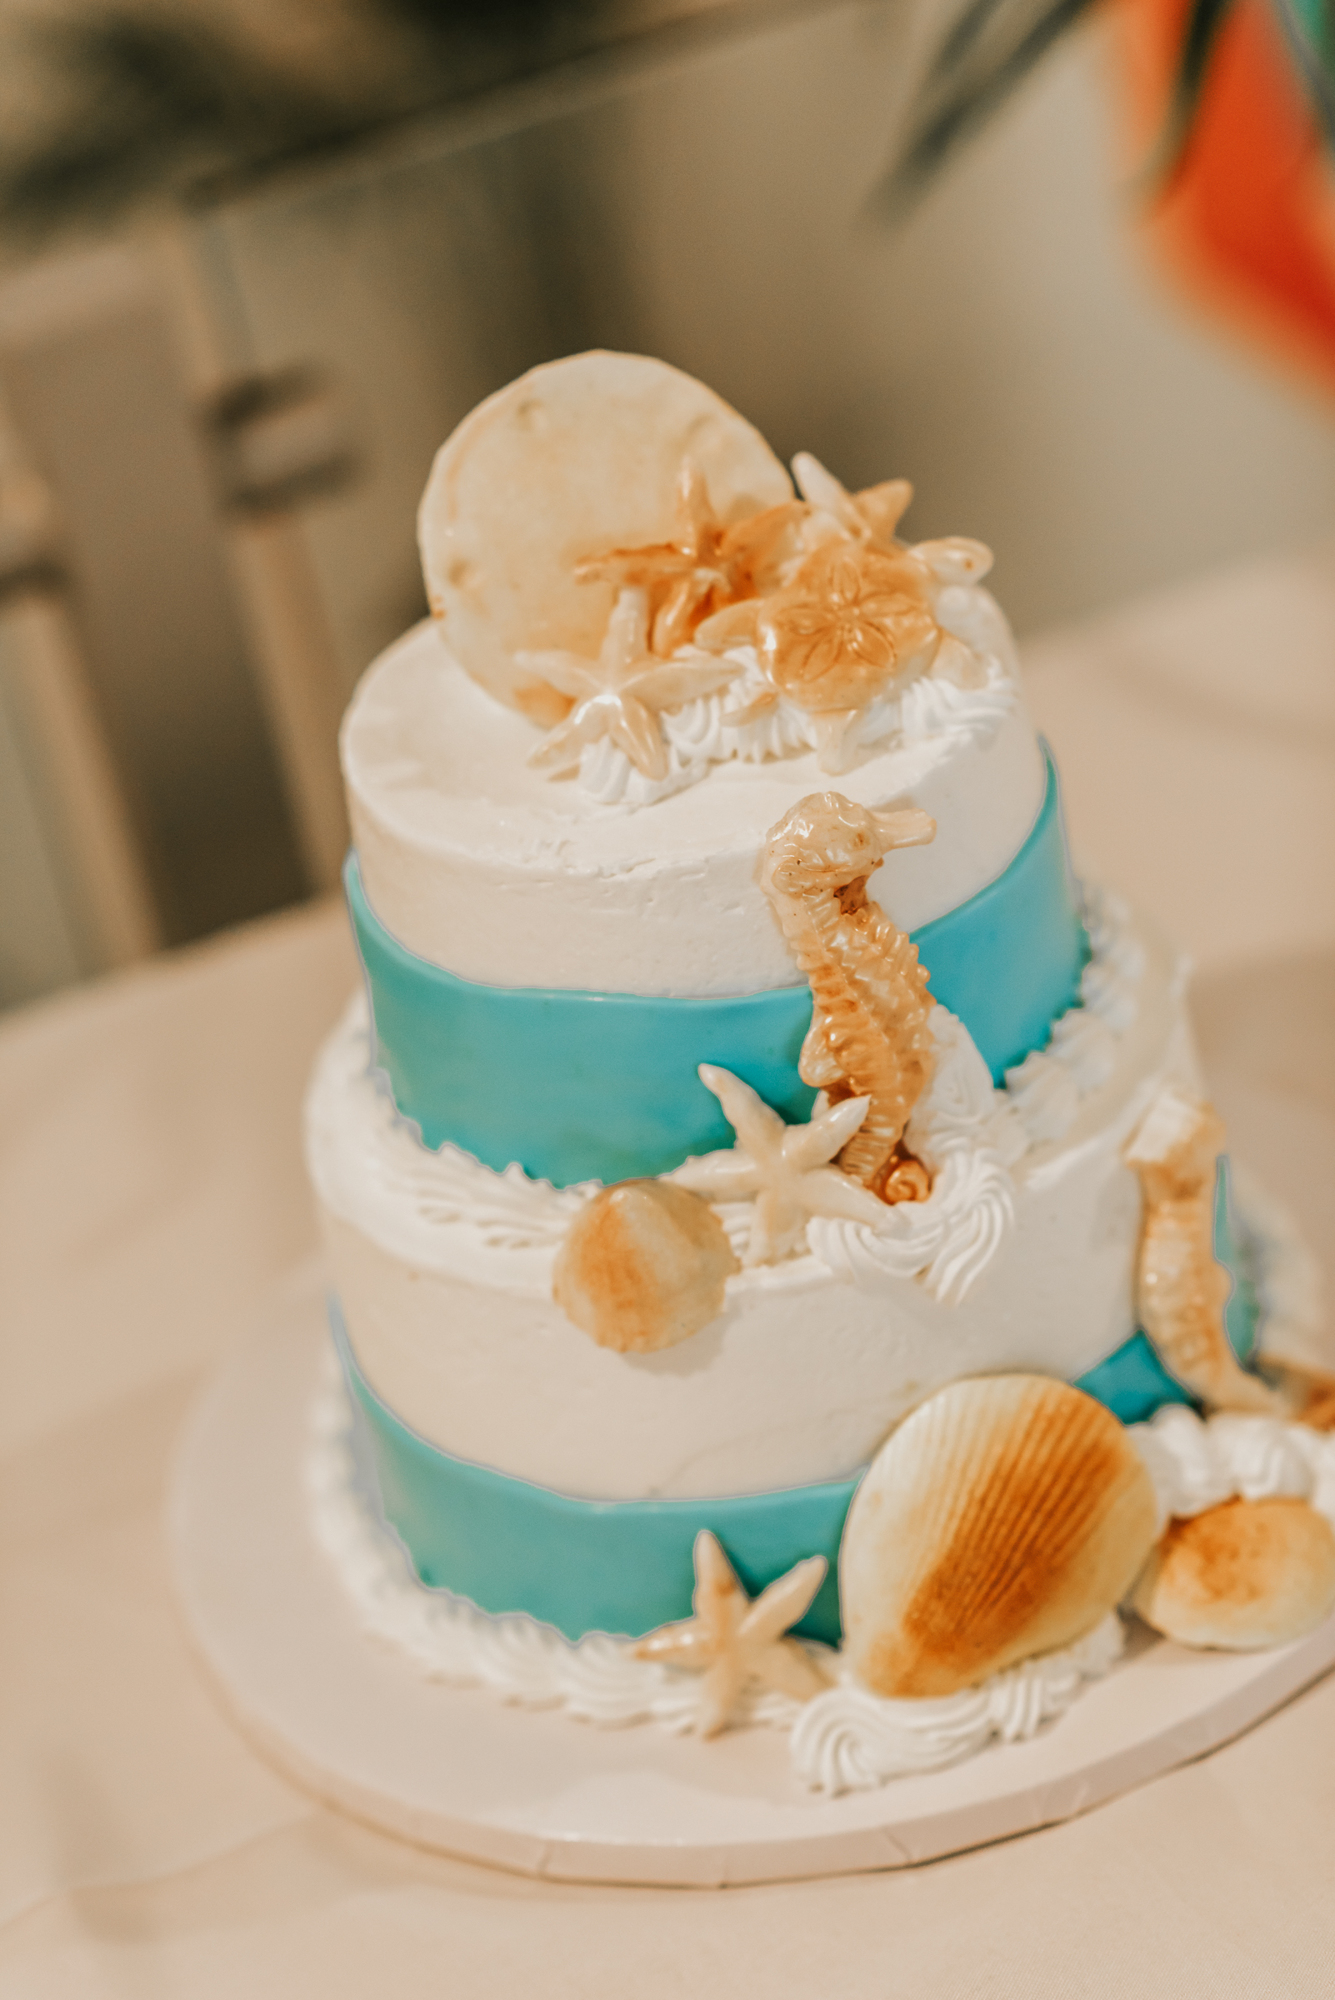 Elana and Marc's wedding cake was adorned with seashells and pineapple jam. Photo by Regina Rached.